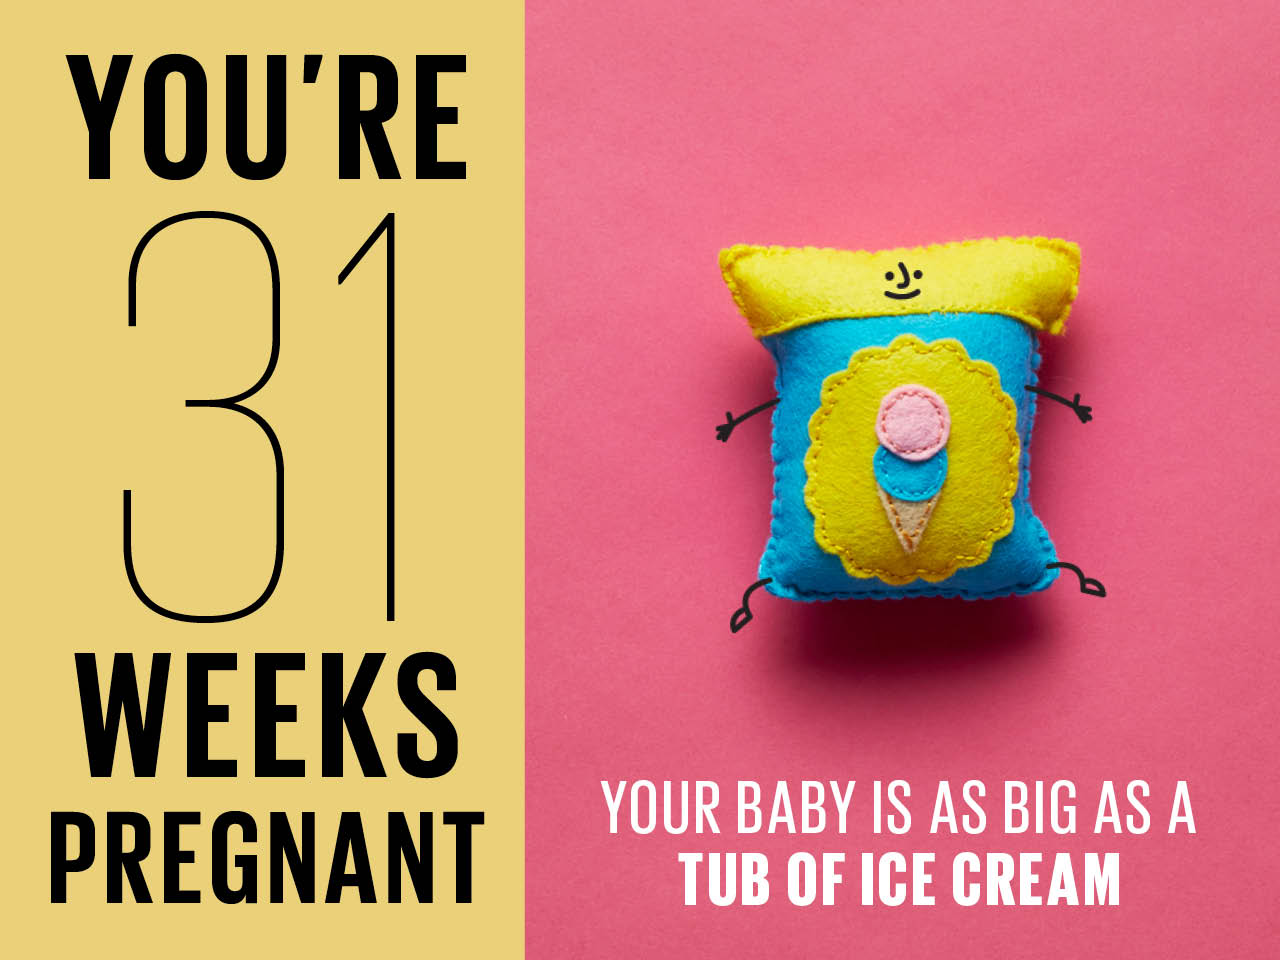 Felt tub of ice cream used to show how big baby is at 31 weeks pregnant